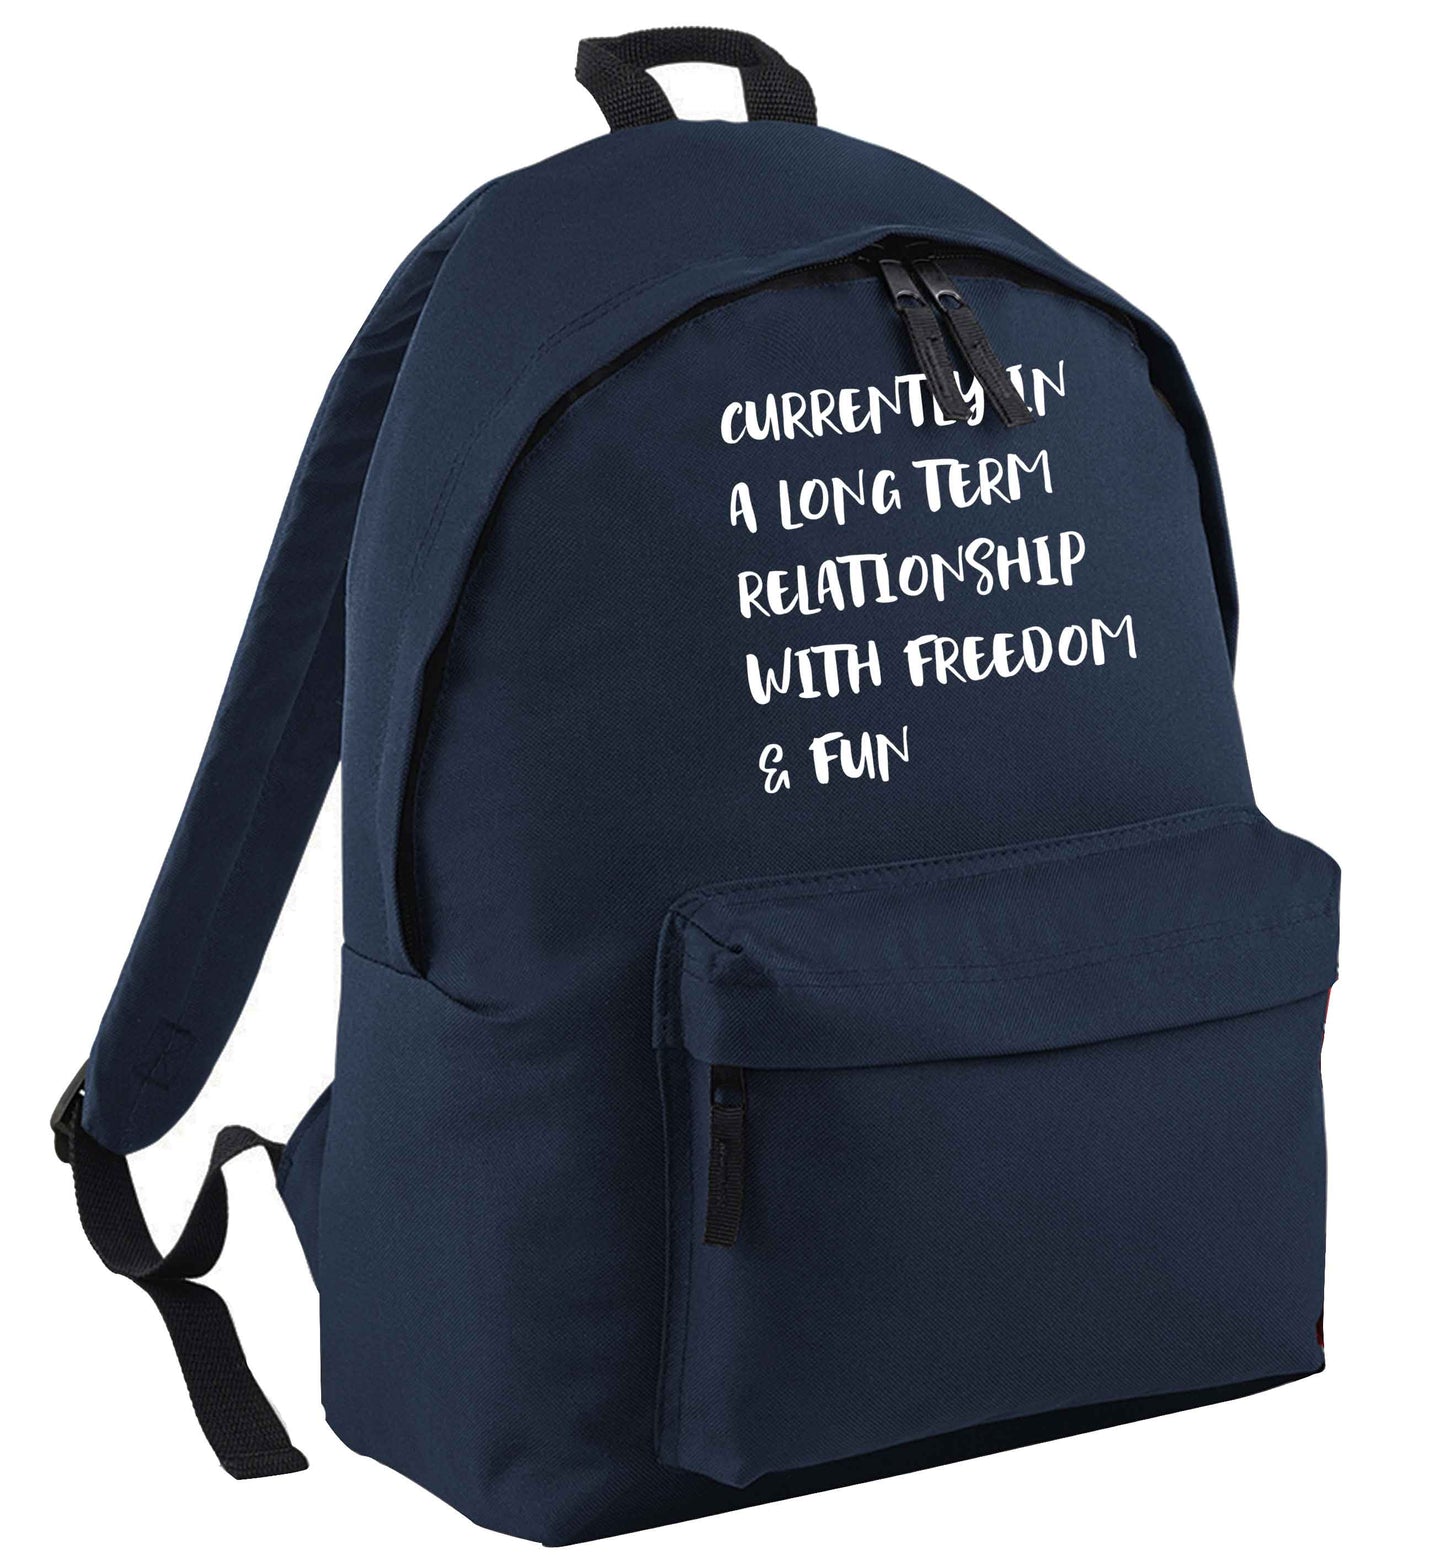 Currently in a long term relationship with freedom and fun navy adults backpack